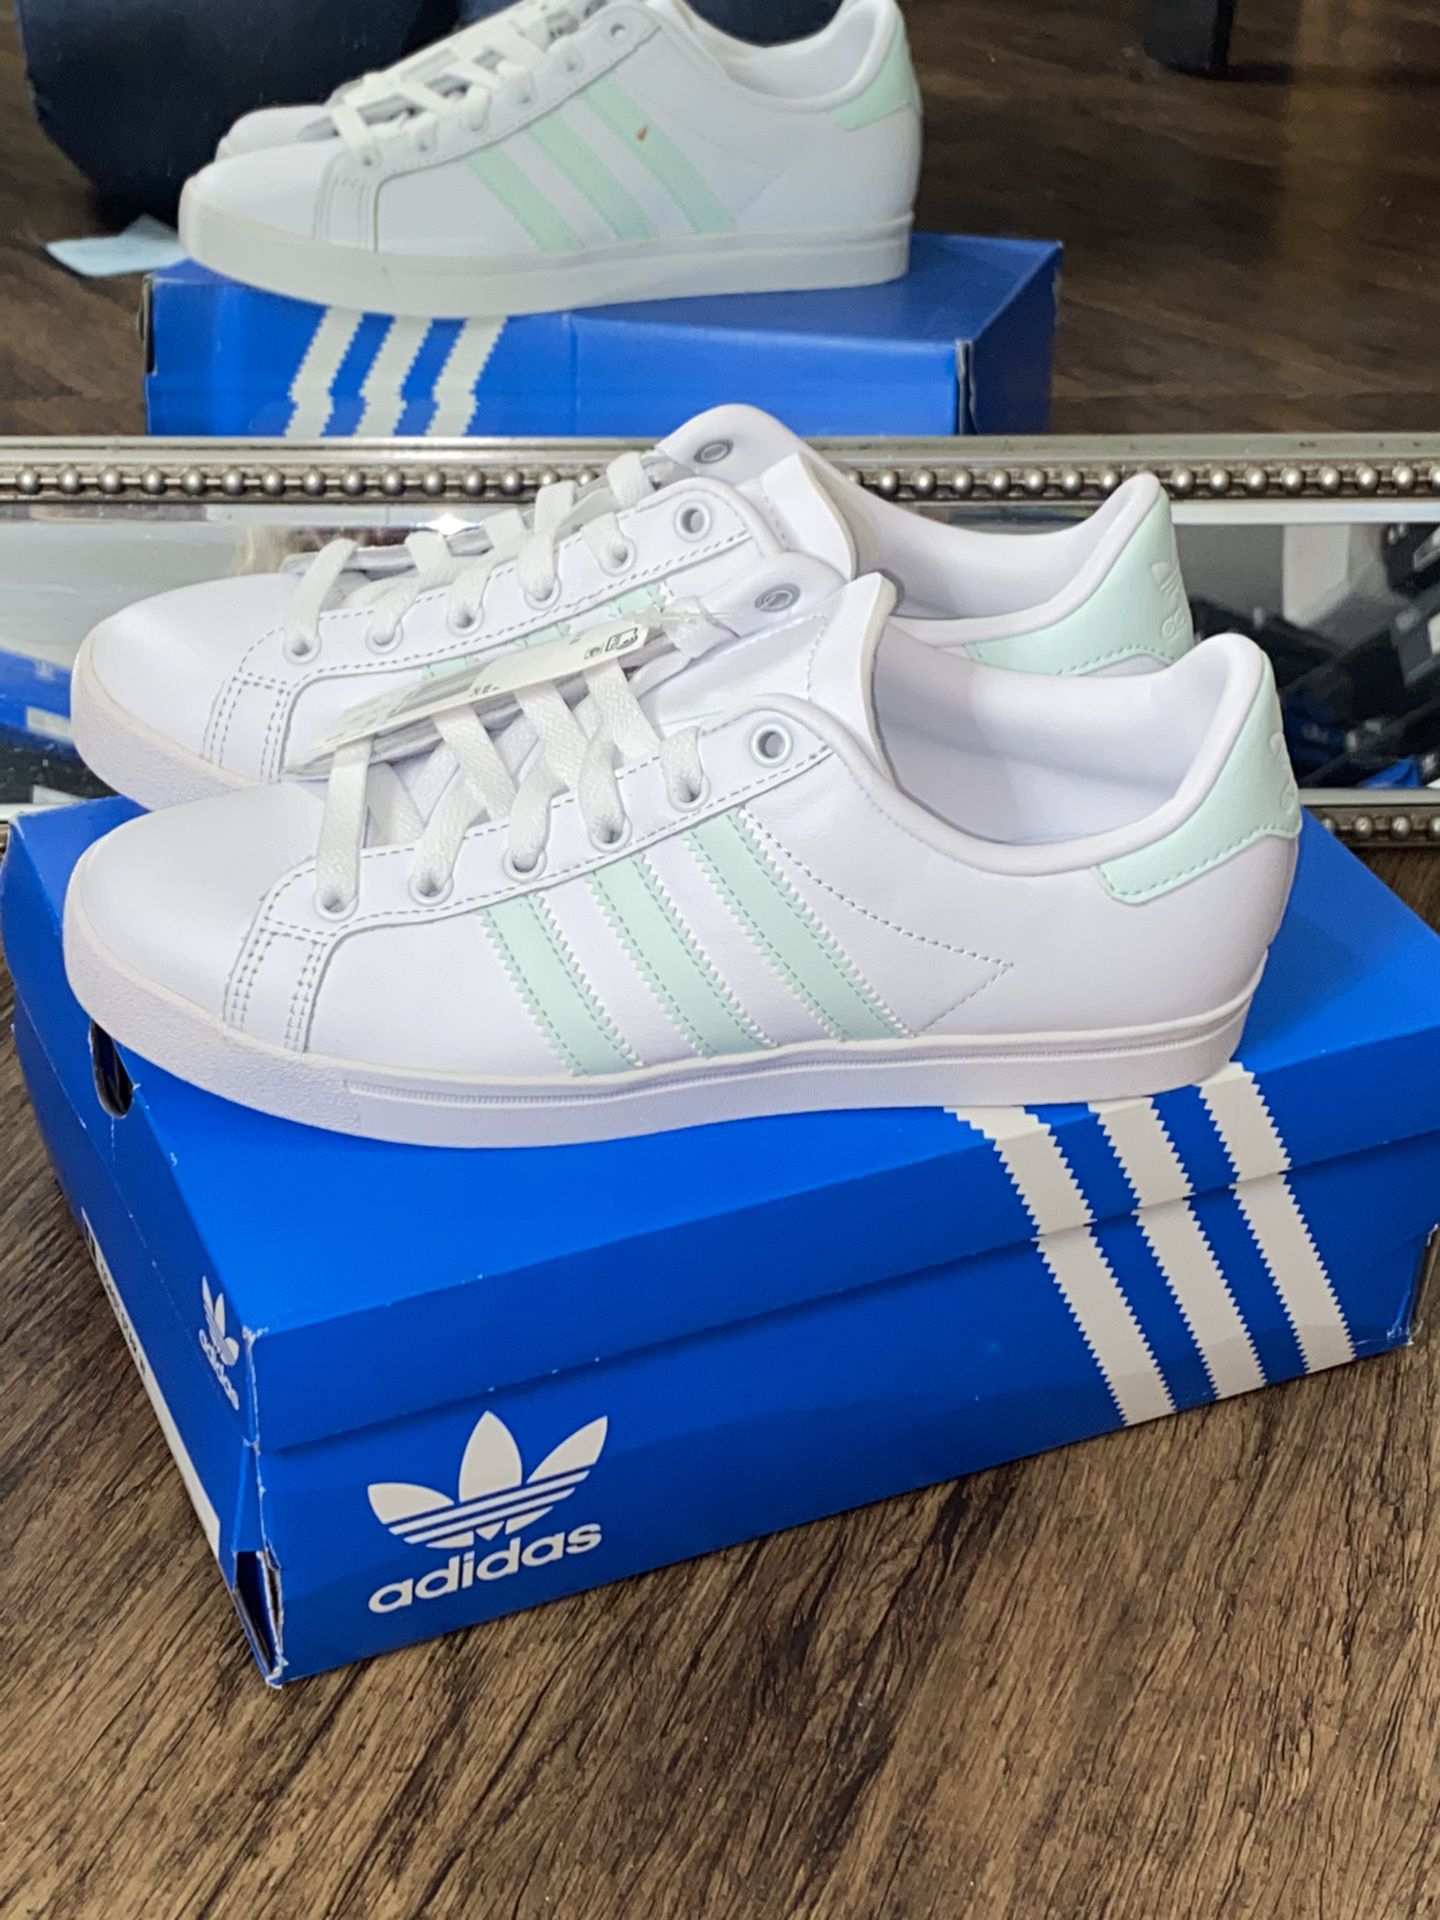 Adidas Coast Star Womens Sneakers for Sale Costa CA - OfferUp